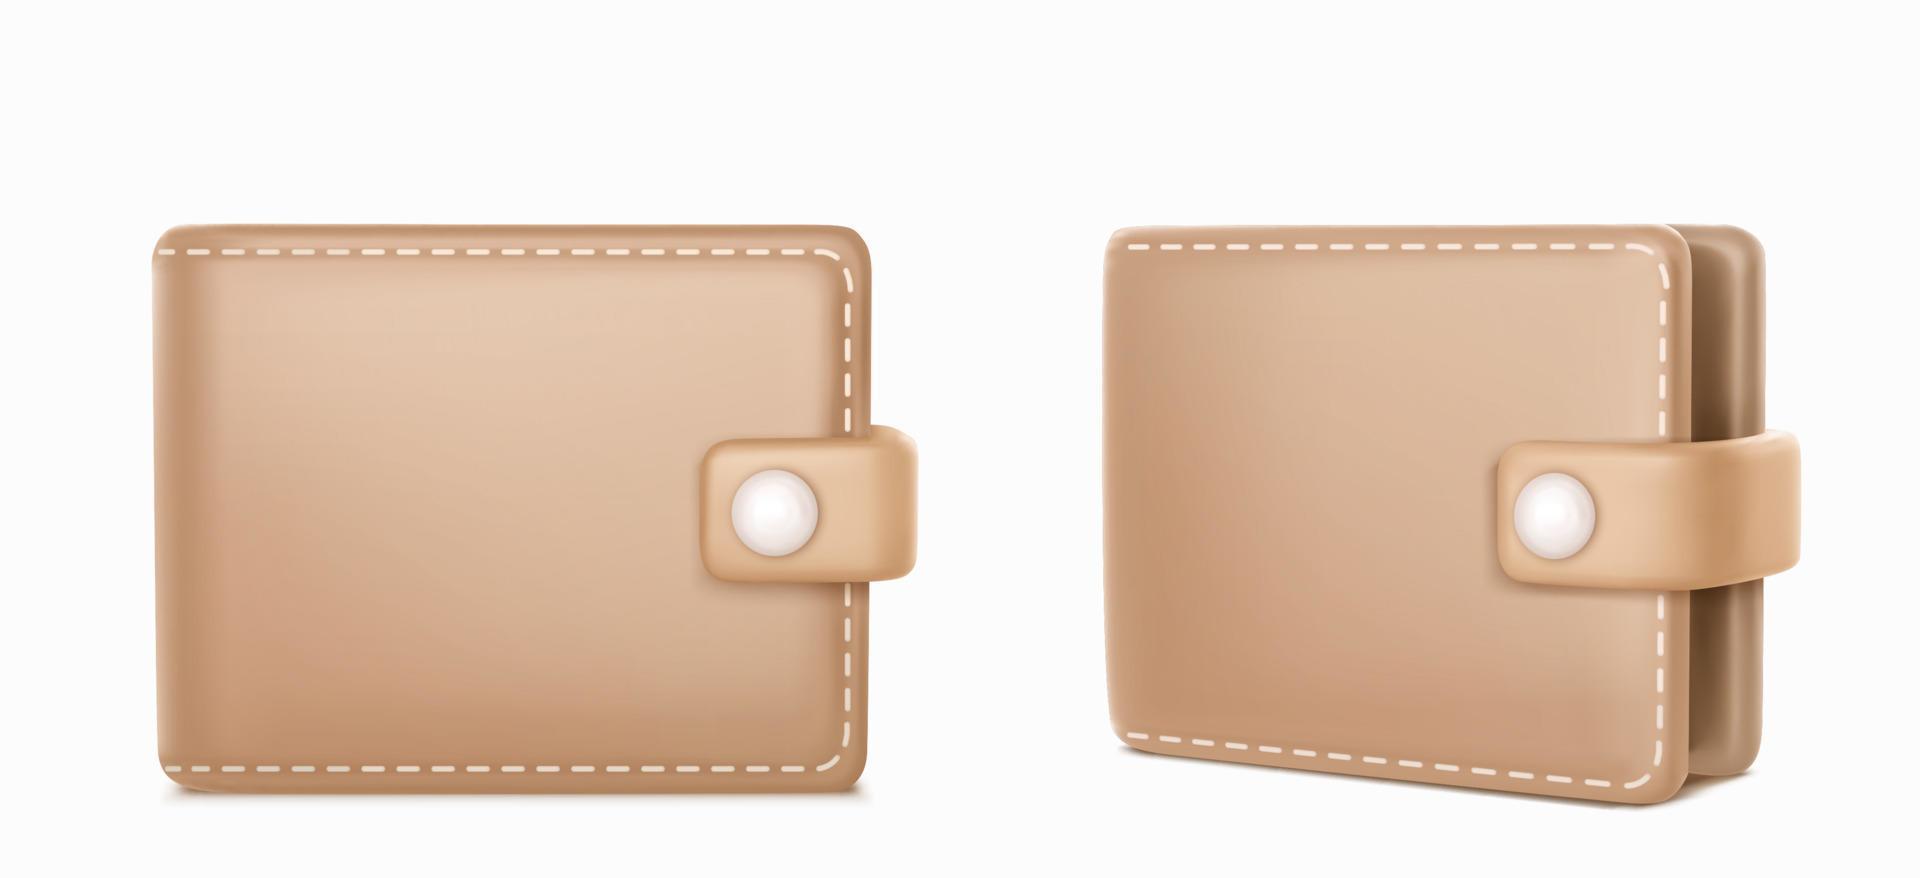 Leather wallet 3d render front and angle view vector